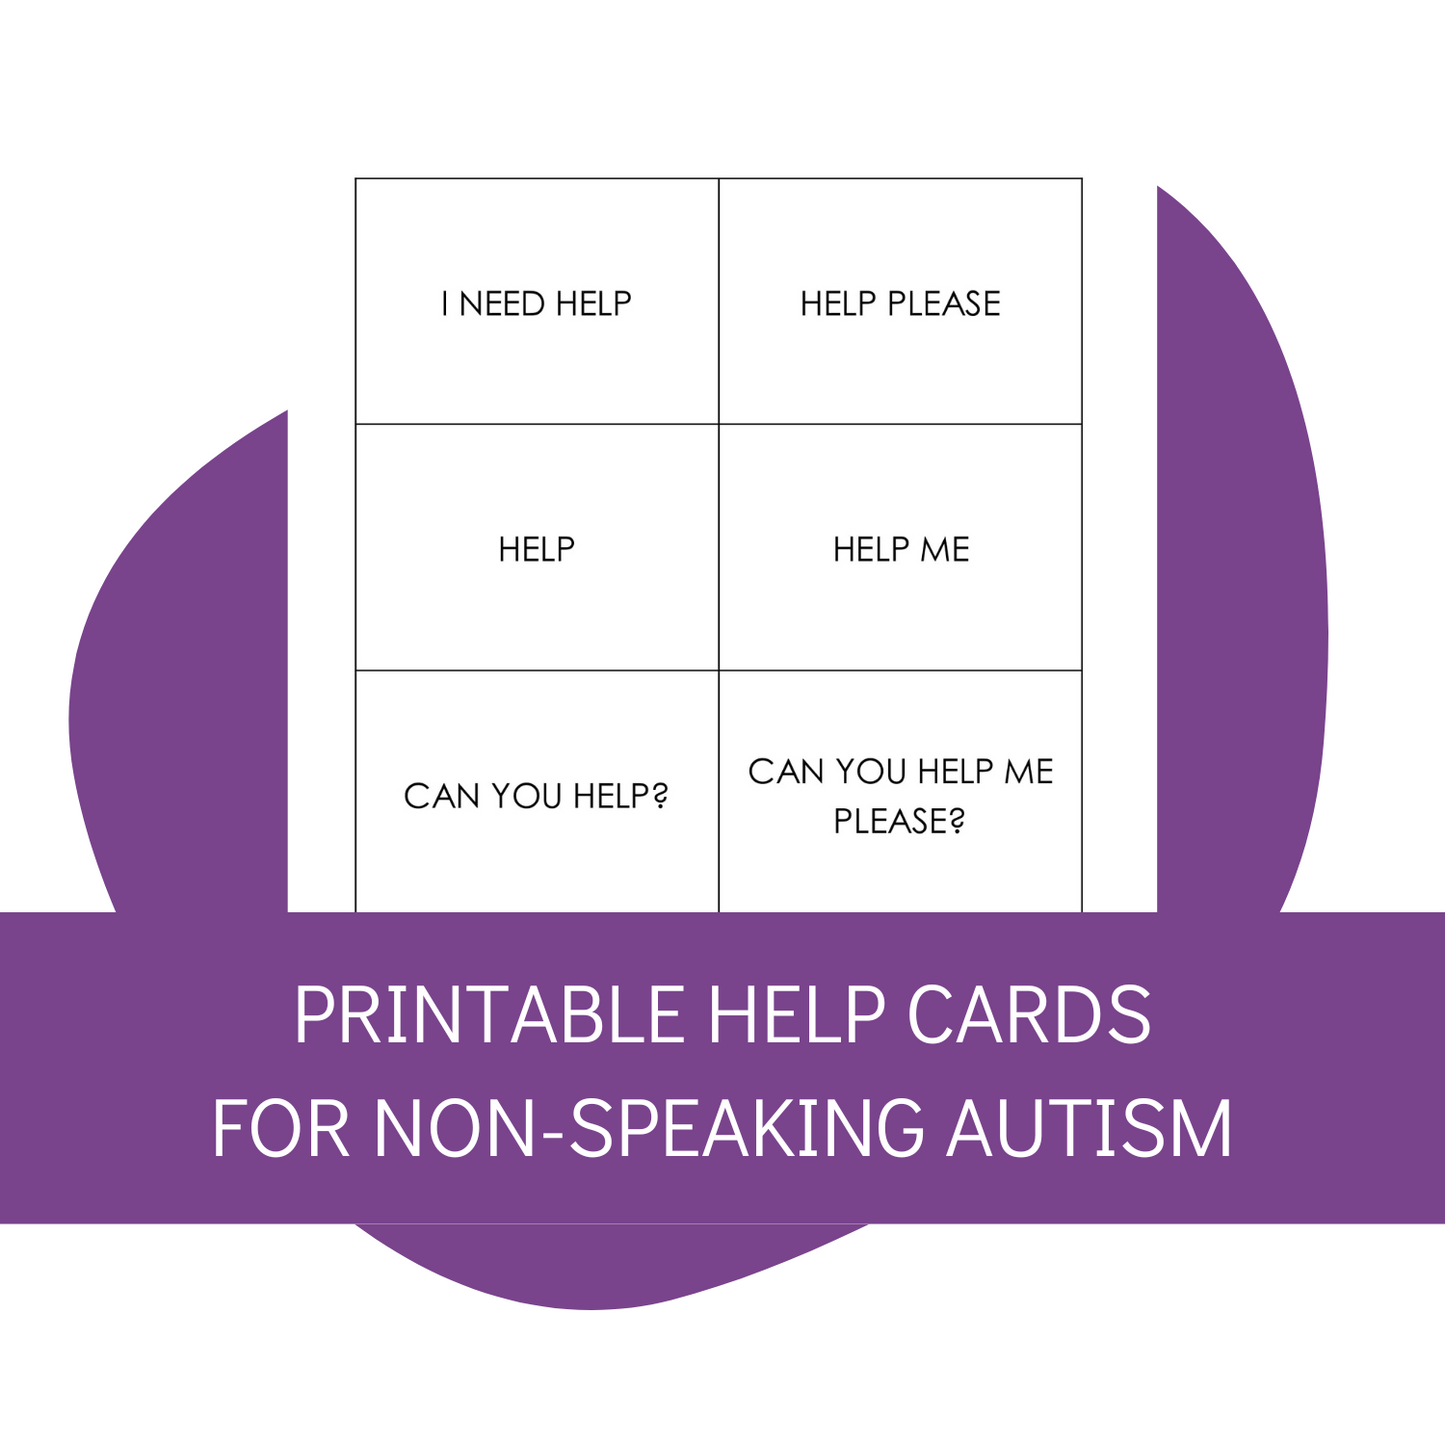 Printable Help Cards for Nonverbal Autism